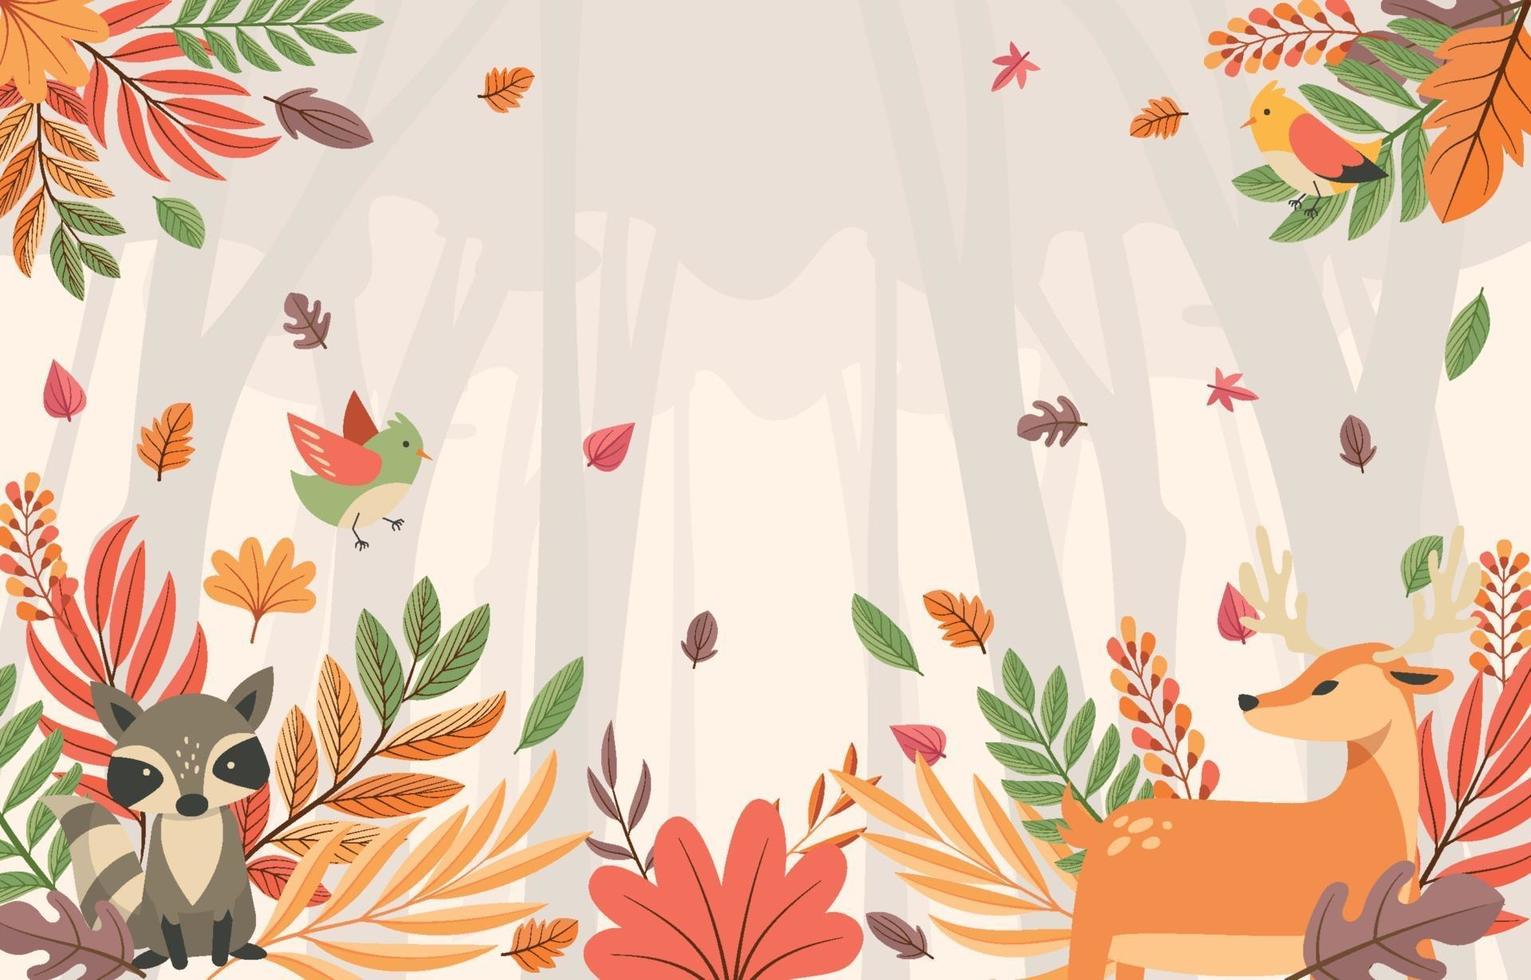 Autumn Nature with Flora and Fauna vector